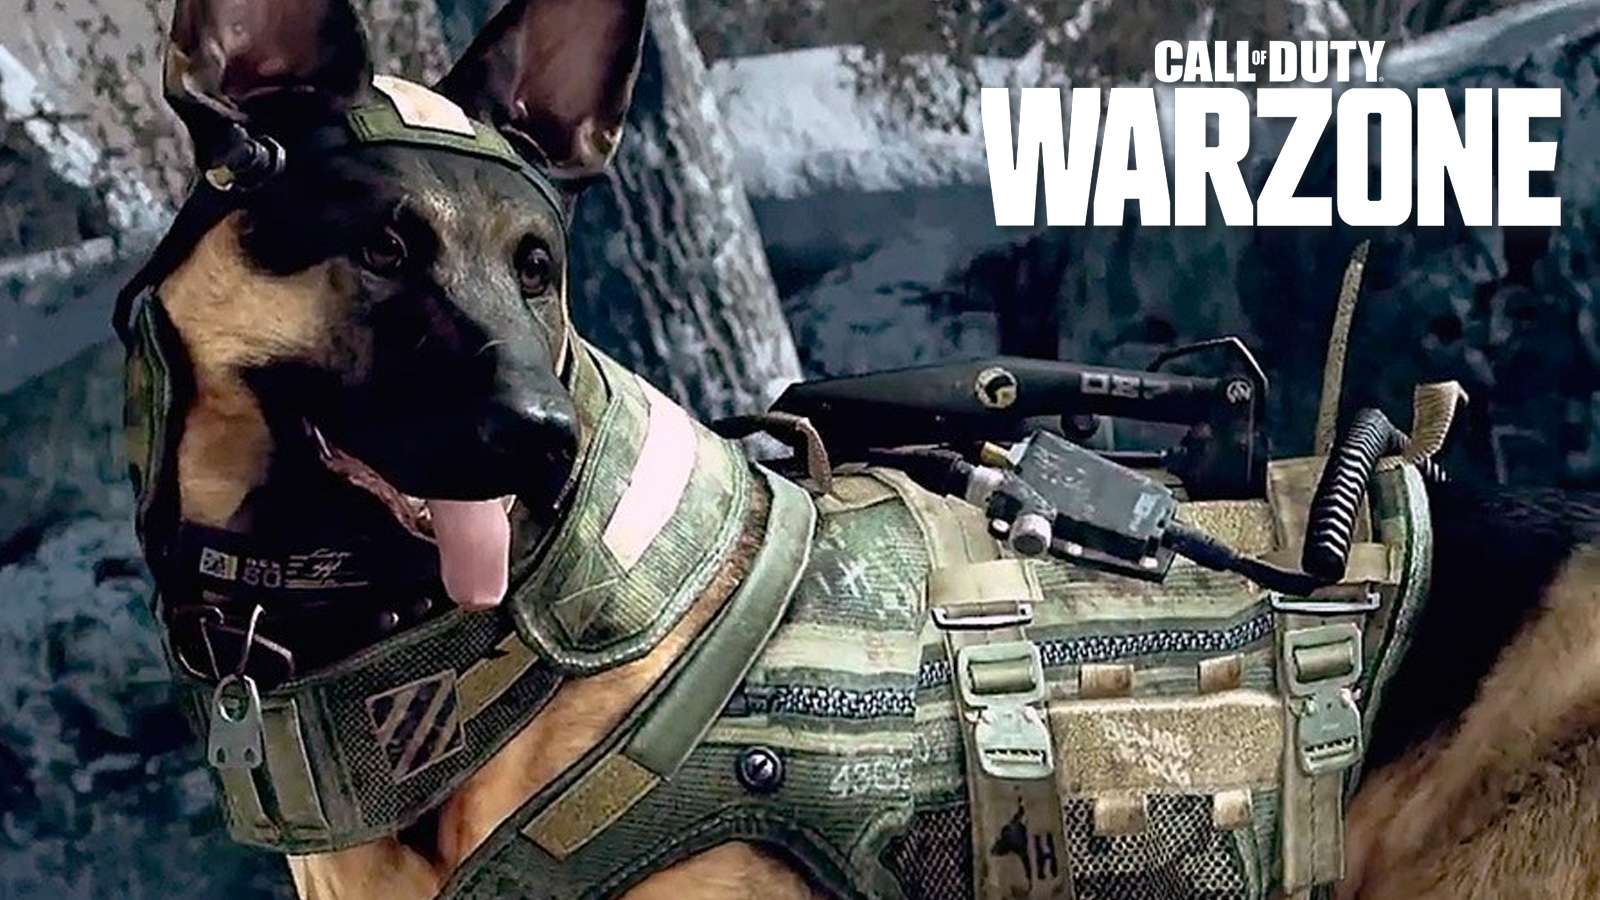 Bizarre Warzone bug turns player’s weapon into a dog